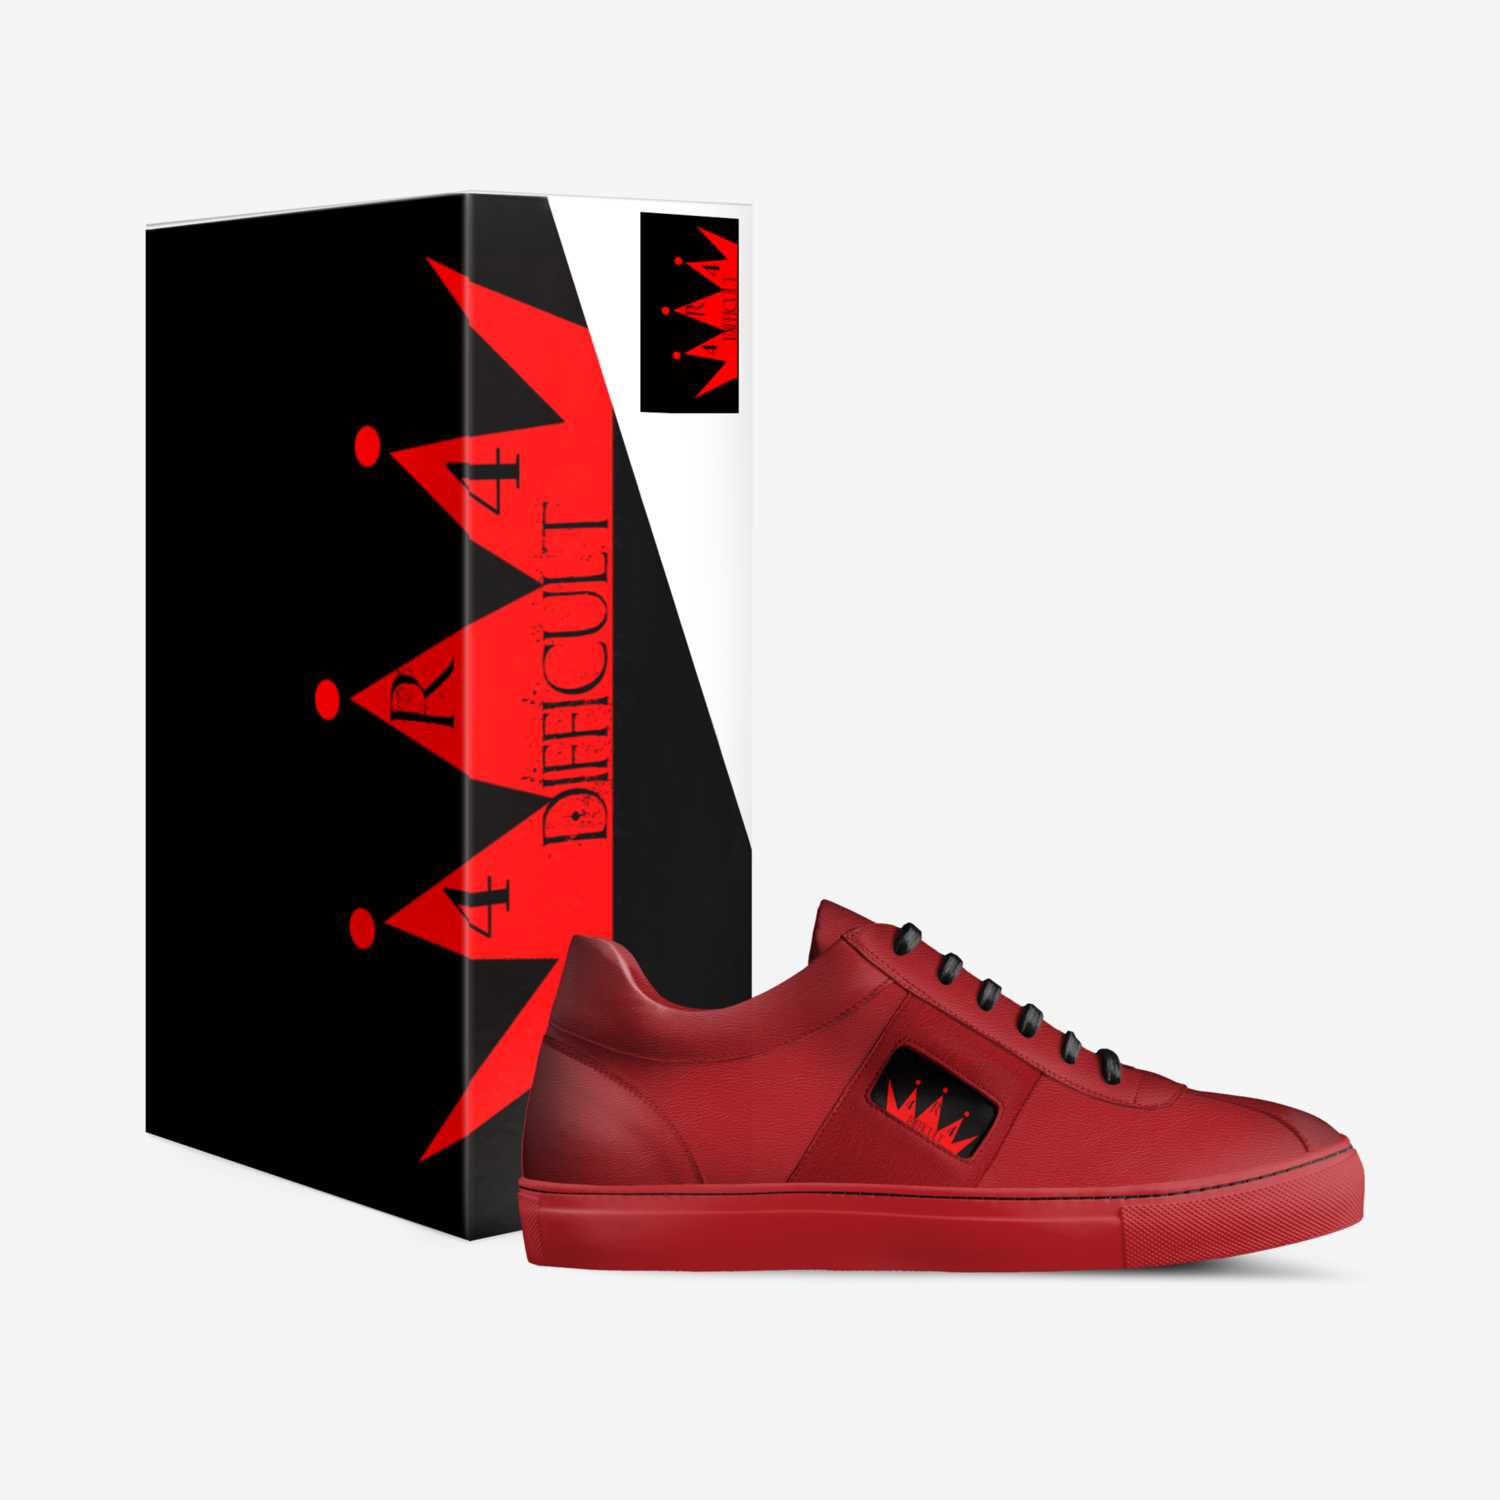 RED 4'z custom made in Italy shoes by Cornelius Pascoe | Box view